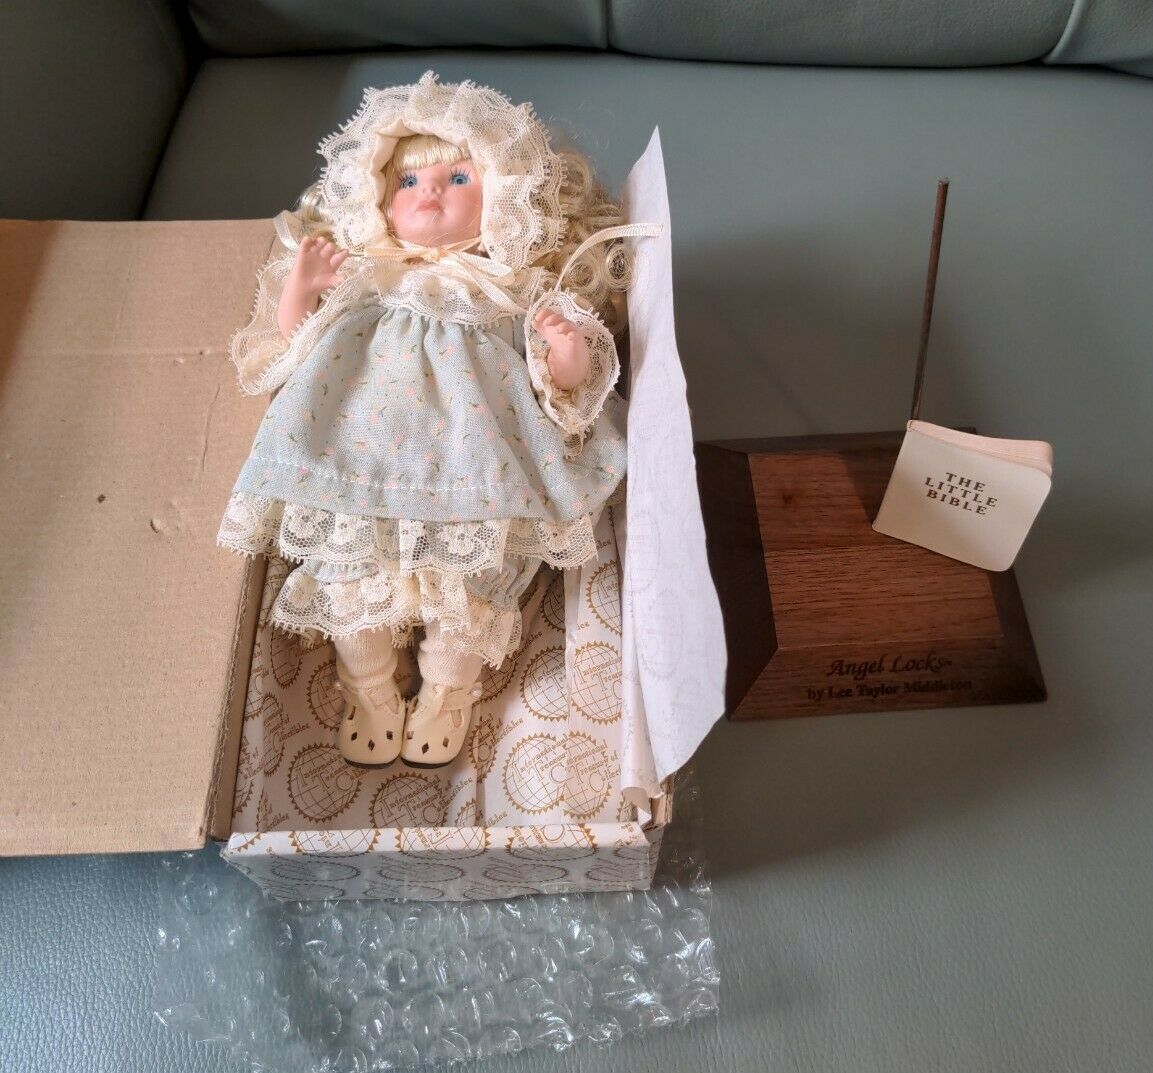 Angel Locks Doll By Lee Taylor Middletown , The Little Bible